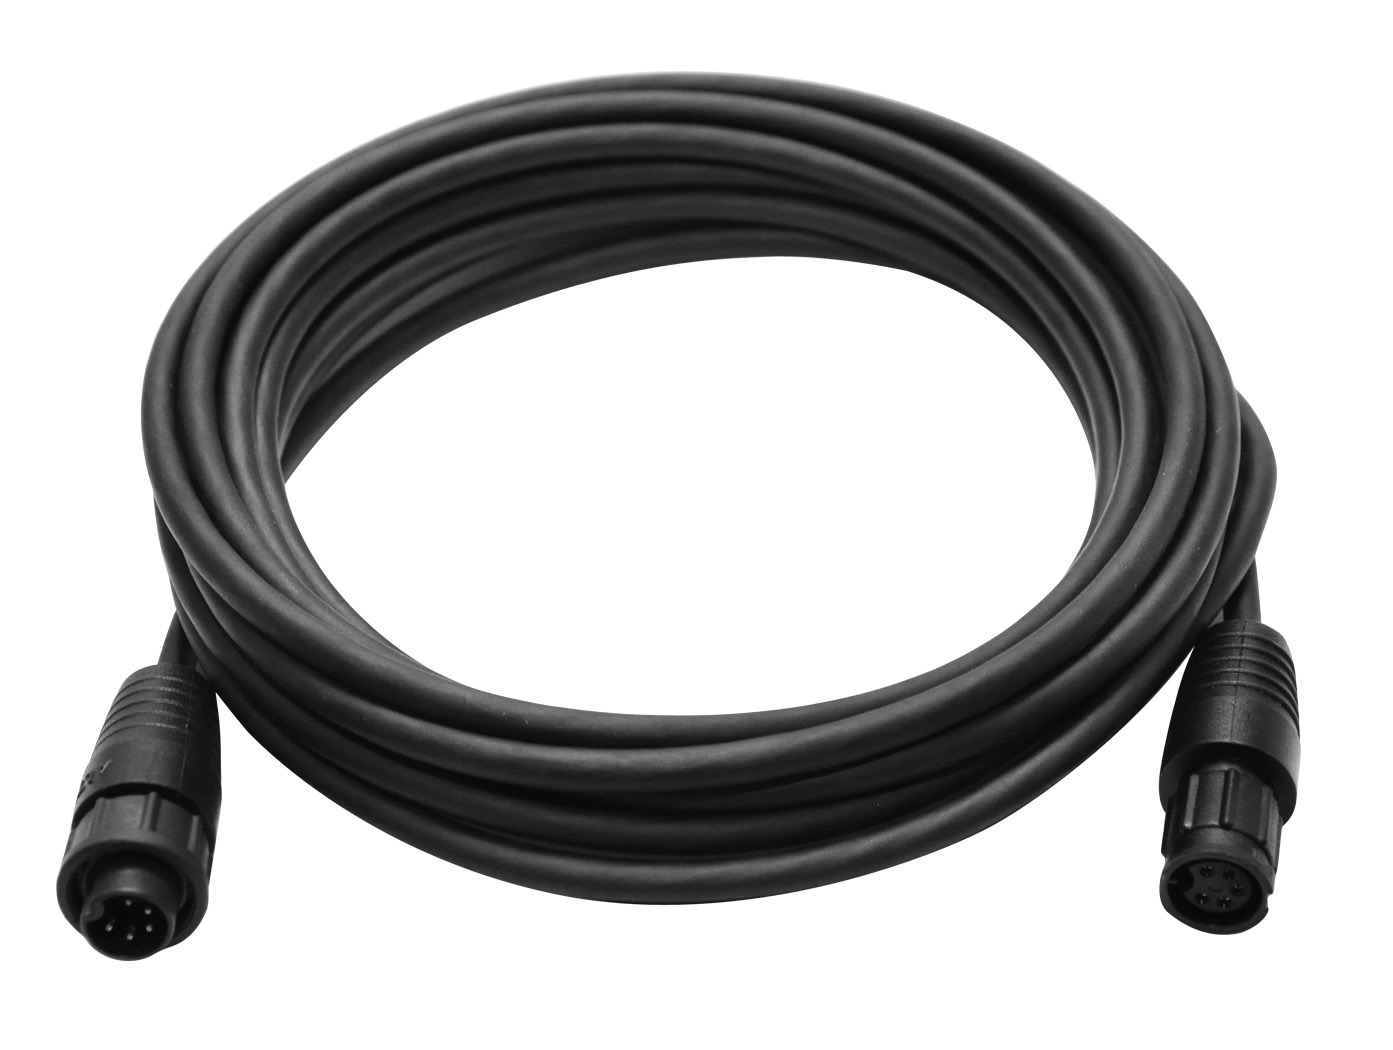 Connecting cable B11 or extension cable B11